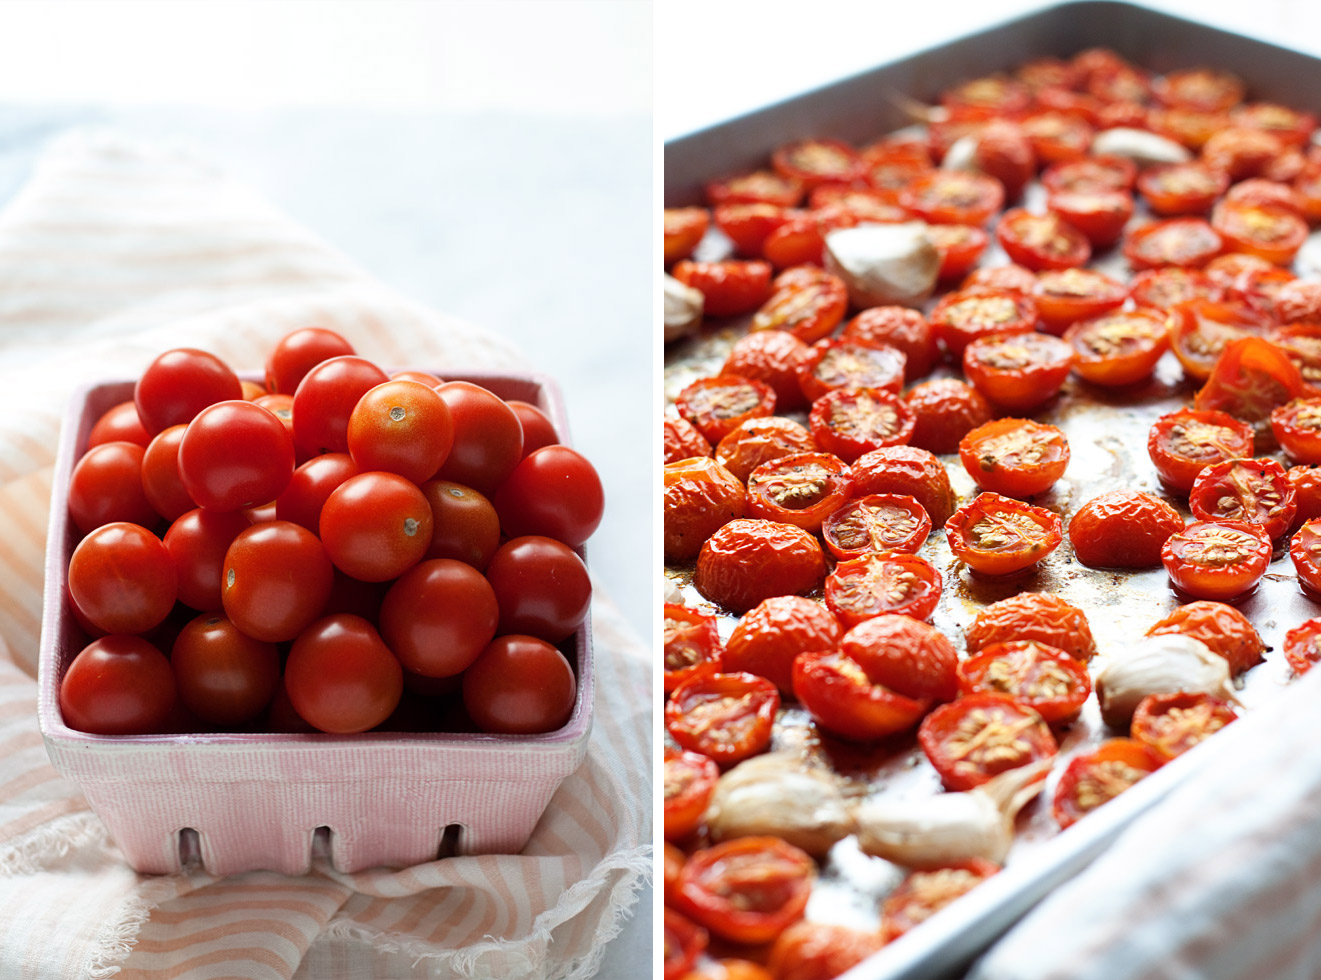 Slow-Roasted Tomato & Garlic Bruschetta recipe - Slow-roasting cherry tomatoes brings out intense flavor! Mix with roasted garlic and fresh basil then spoon over golden-brown garlicky toasts - delicious. Vegan. 